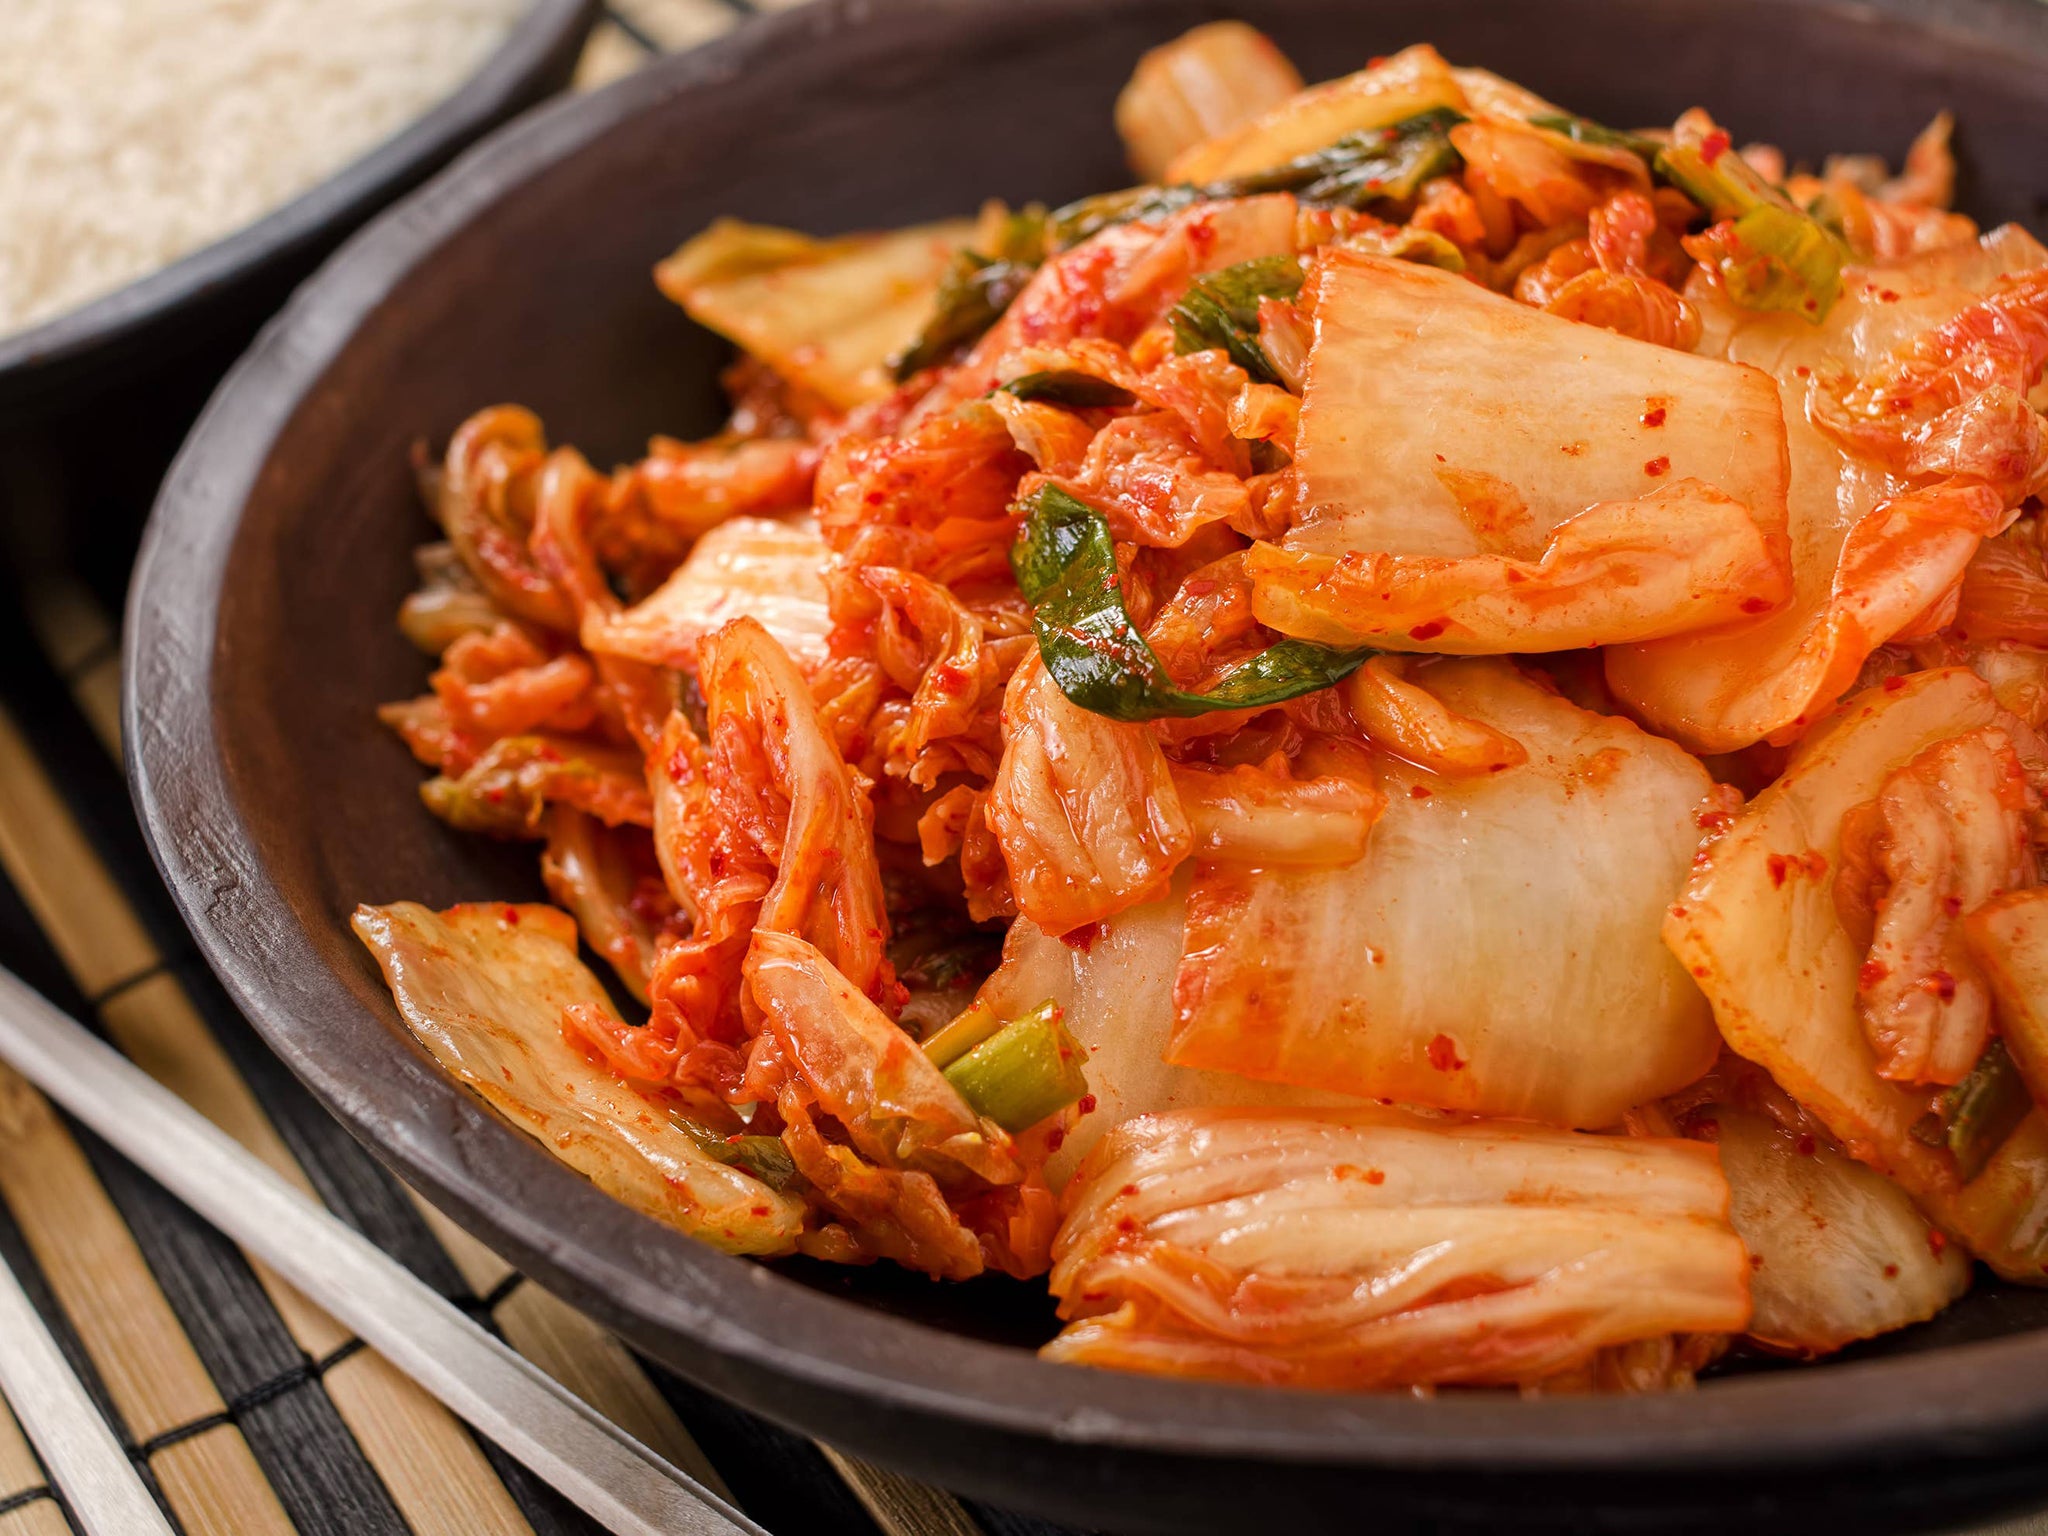 Kimchi is a fermented dish made of cabbage and other vegetables